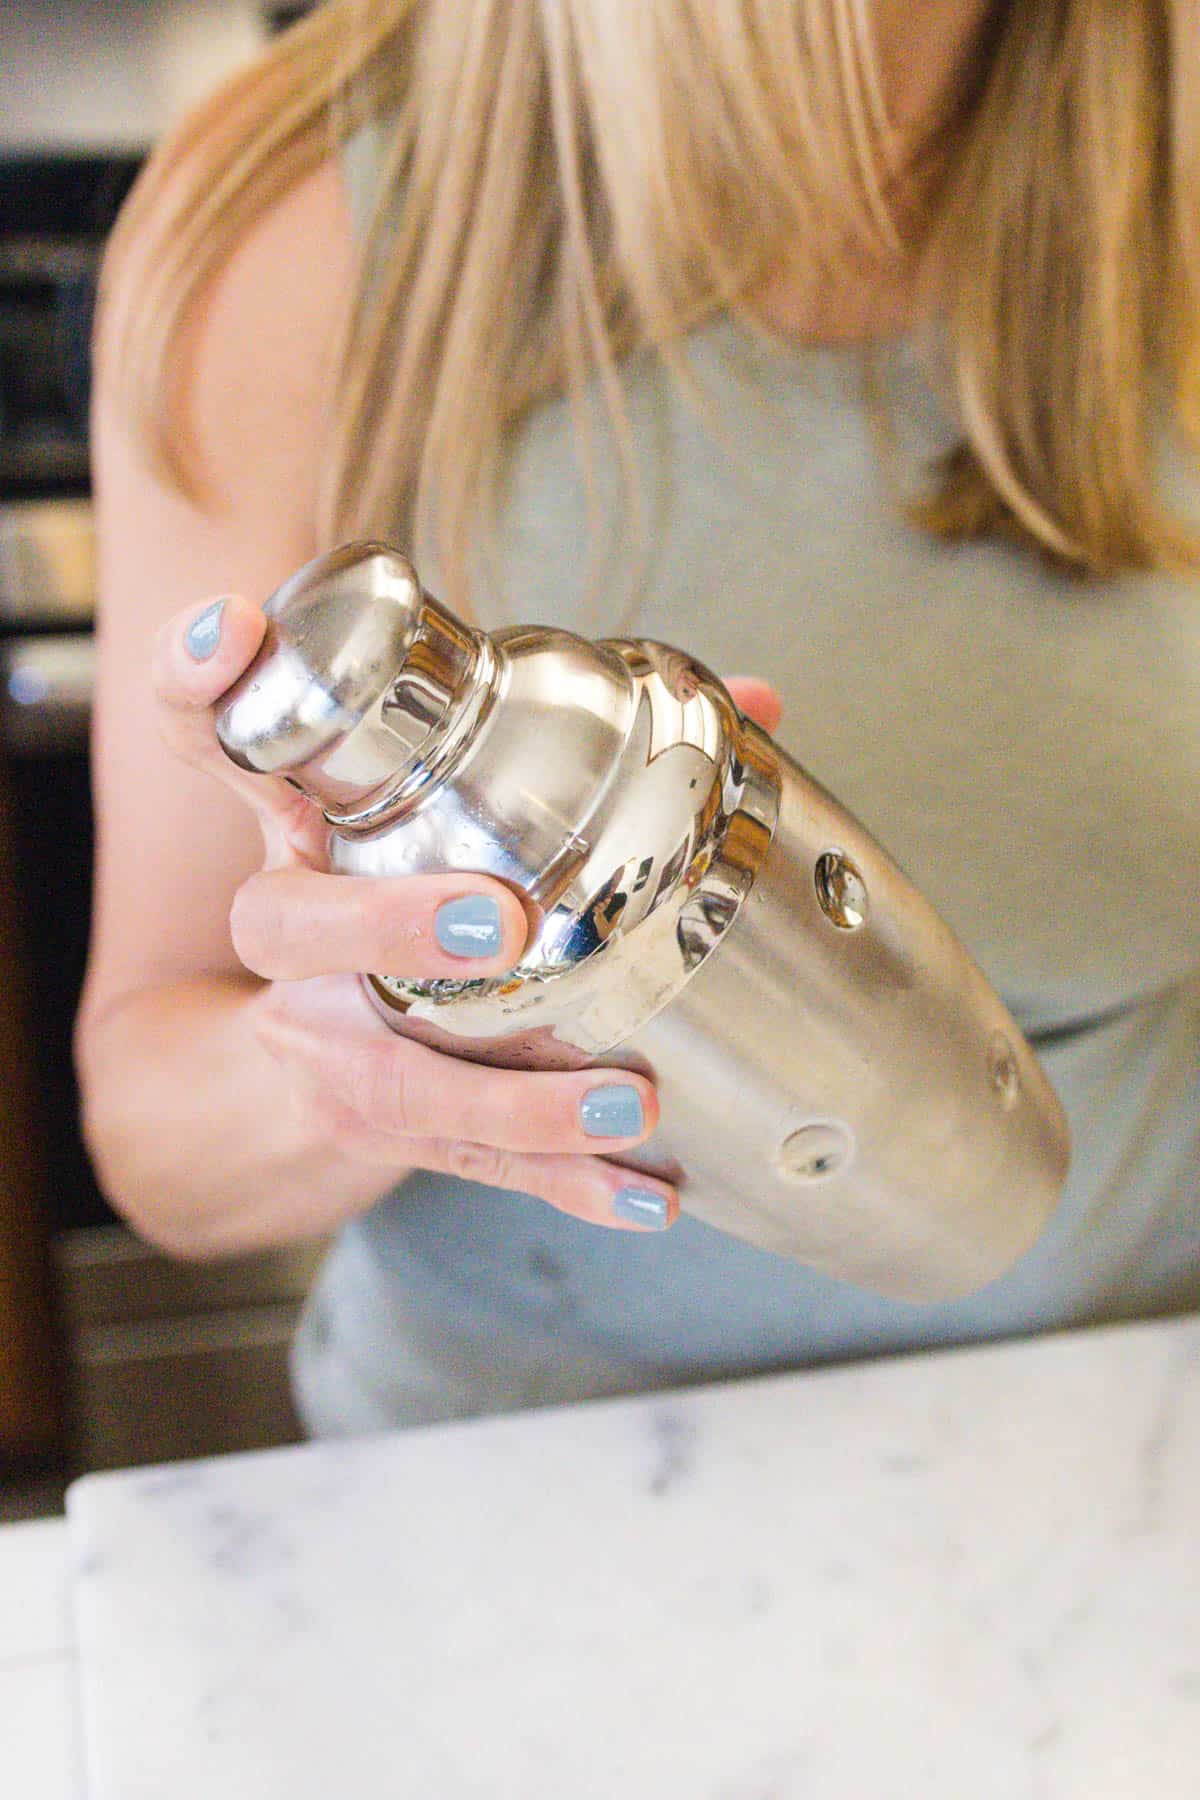 Woman shaking a cocktail shaker.